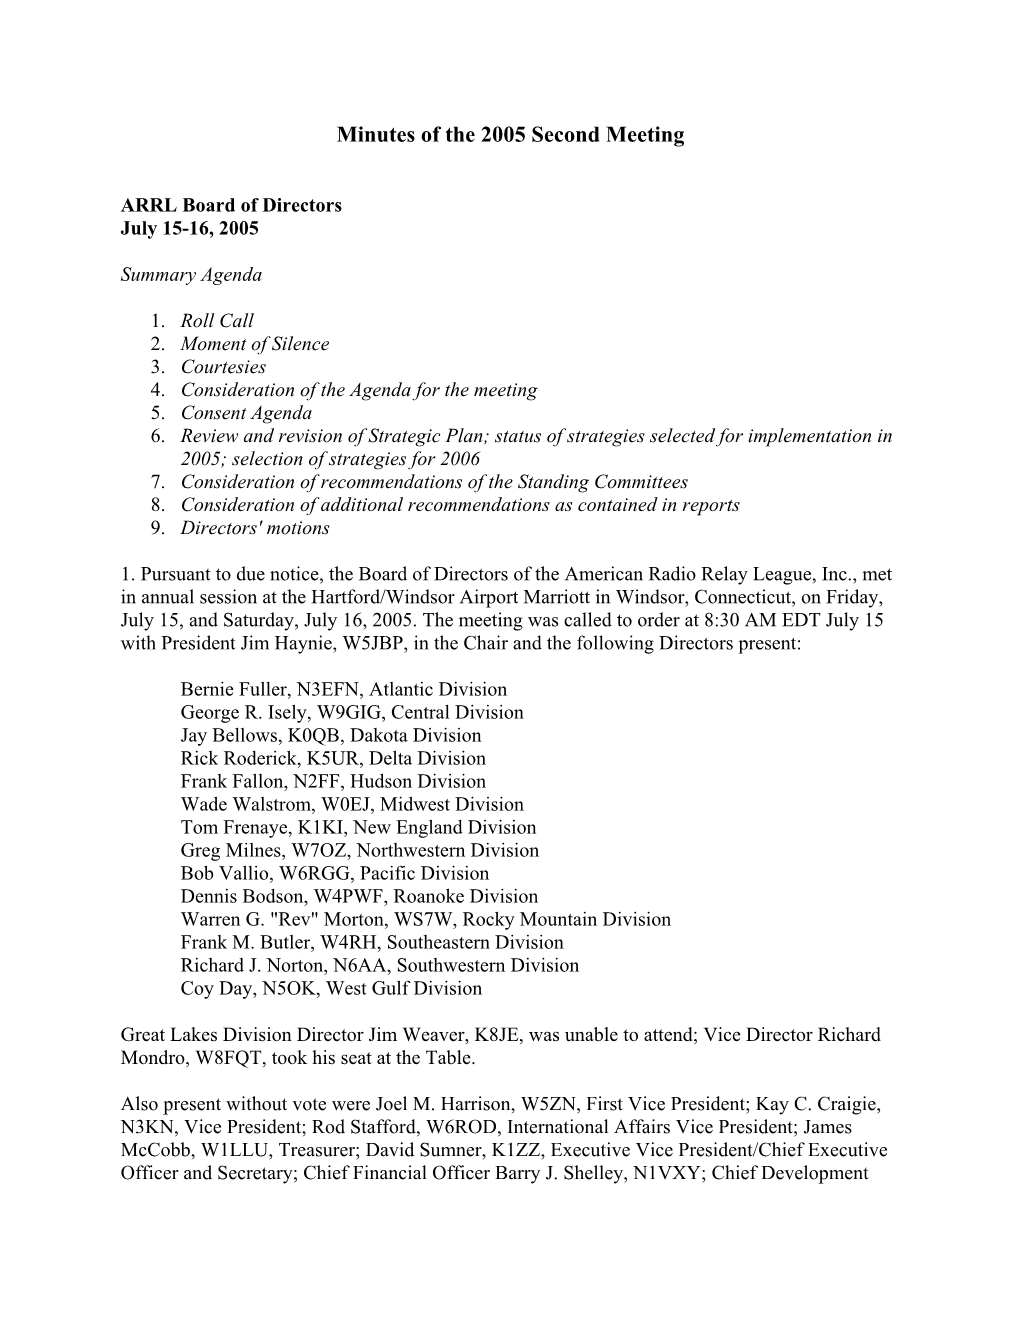 Minutes: 2005 Second Meeting of the ARRL Board of Directors